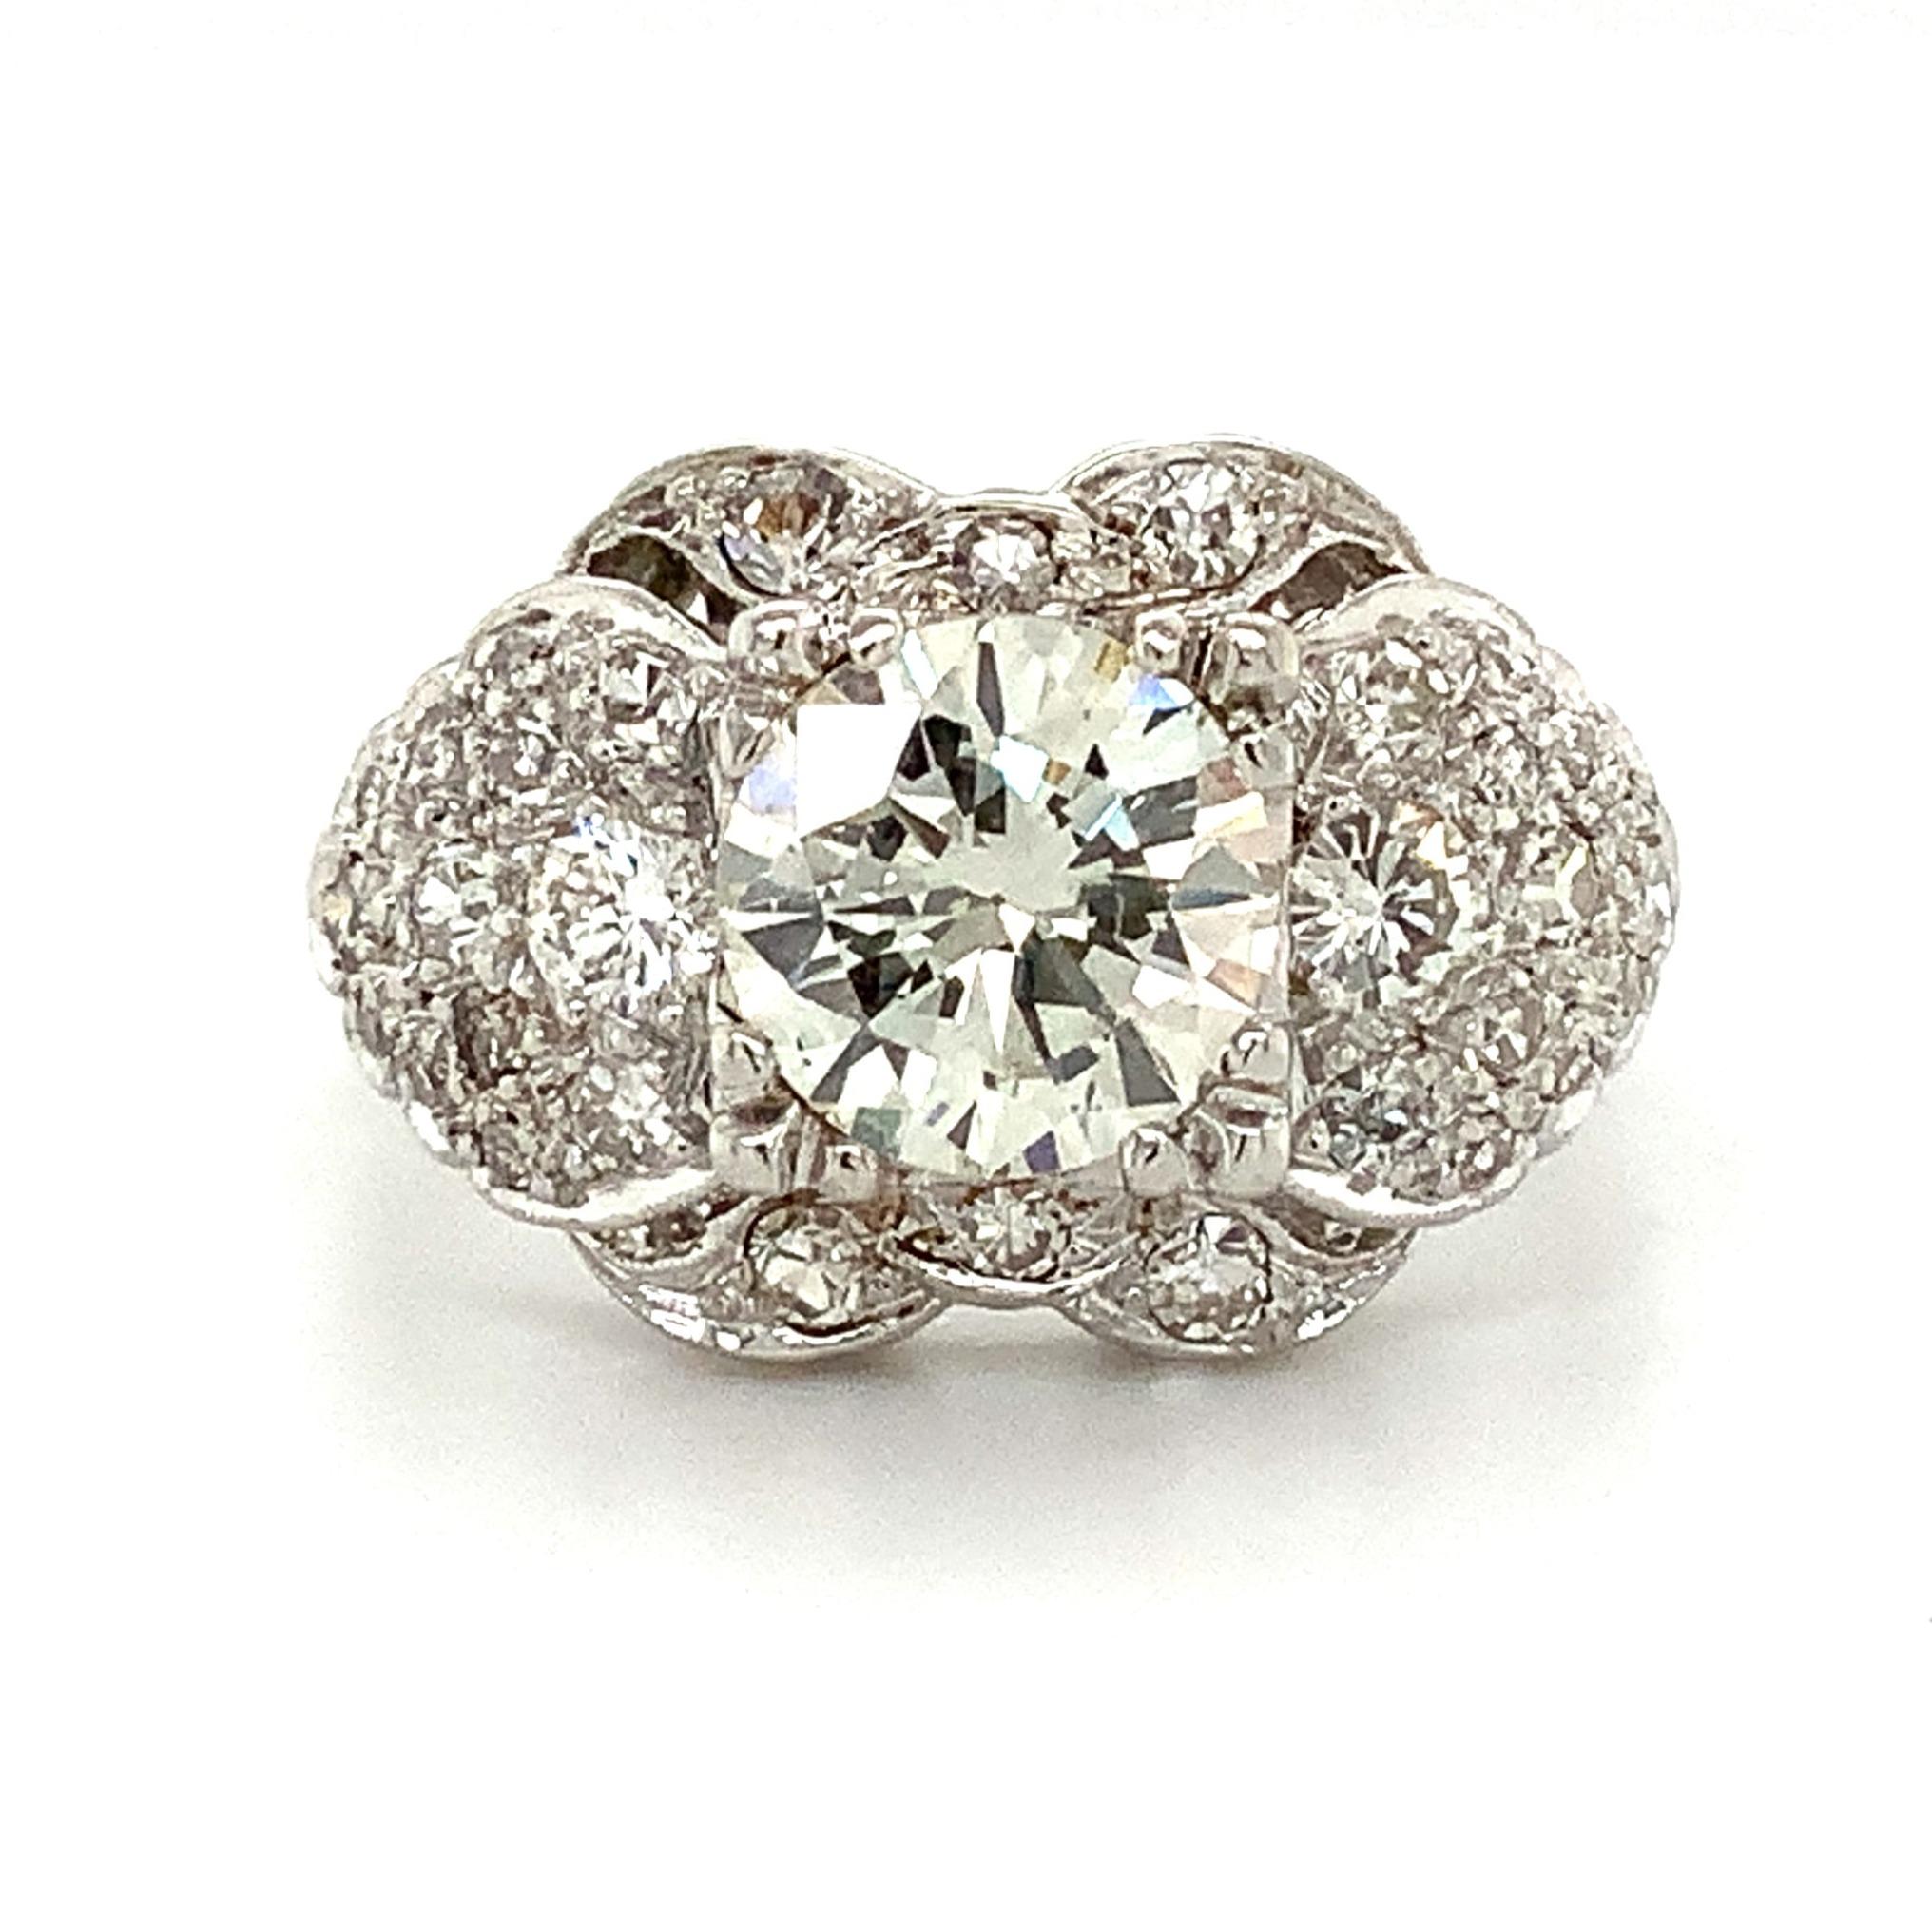 This exquisite Estate Diamond Ring is adorned with 33 Diamonds, with a total carat weight of 2.10cts. It includes 30 single cut Diamonds and two brilliant cut Diamonds, with a statement-making 1.35ct Center Diamond. This Center Diamond, of Modern